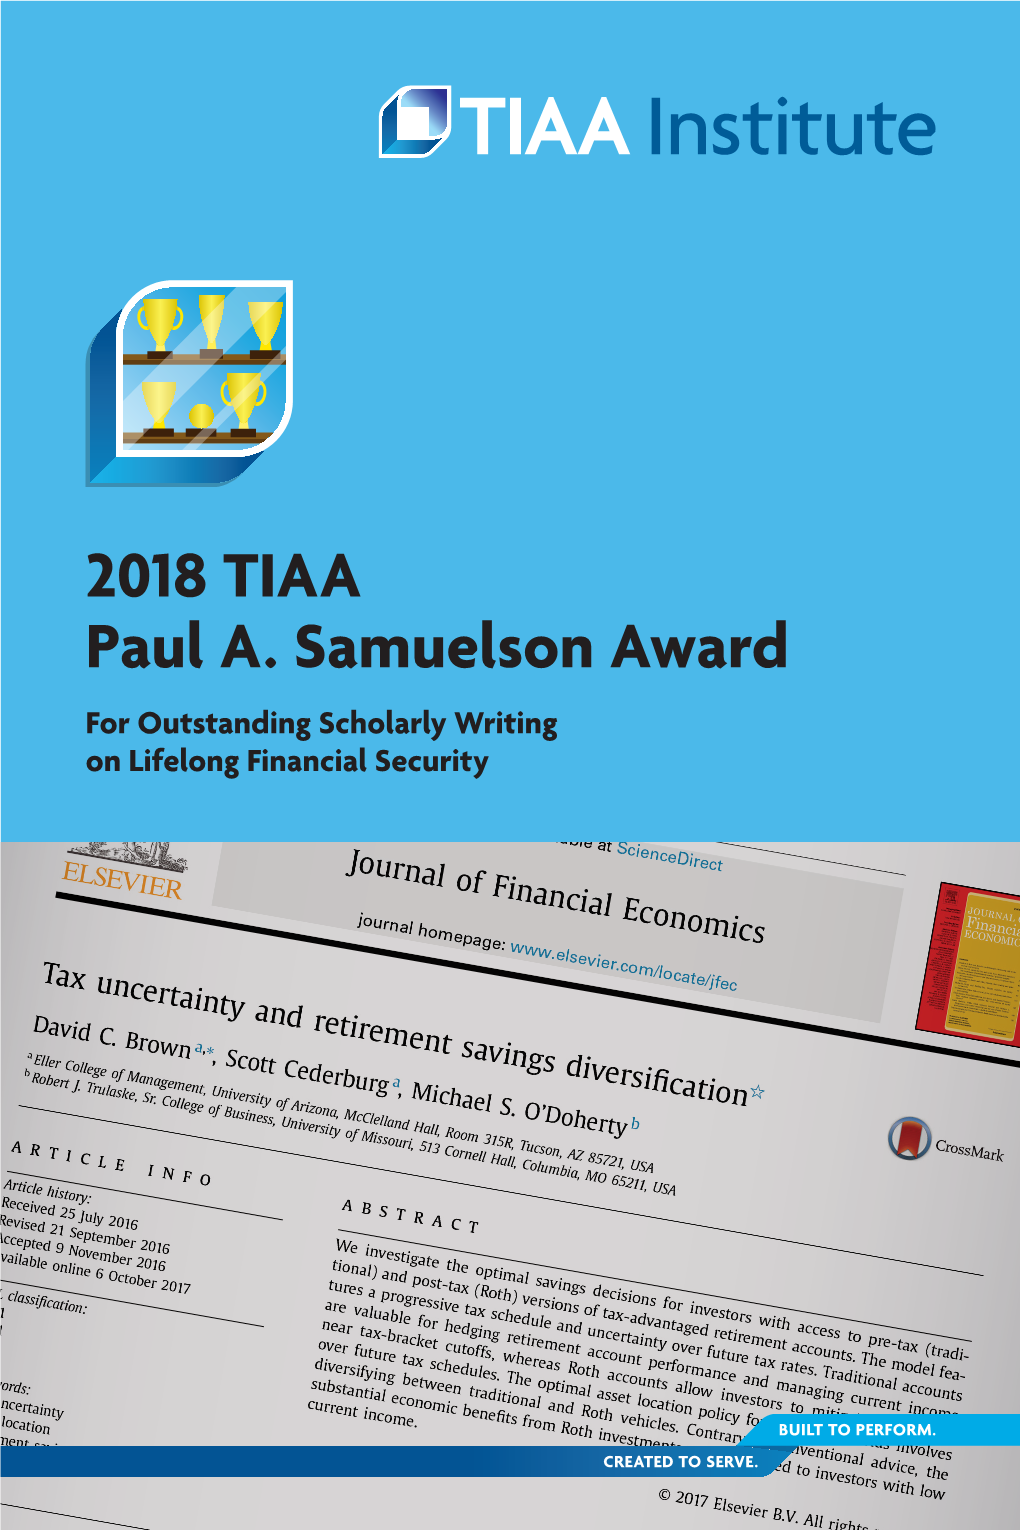 2018 TIAA Paul A. Samuelson Award for Outstanding Scholarly Writing on Lifelong Financial Security About the TIAA Paul A